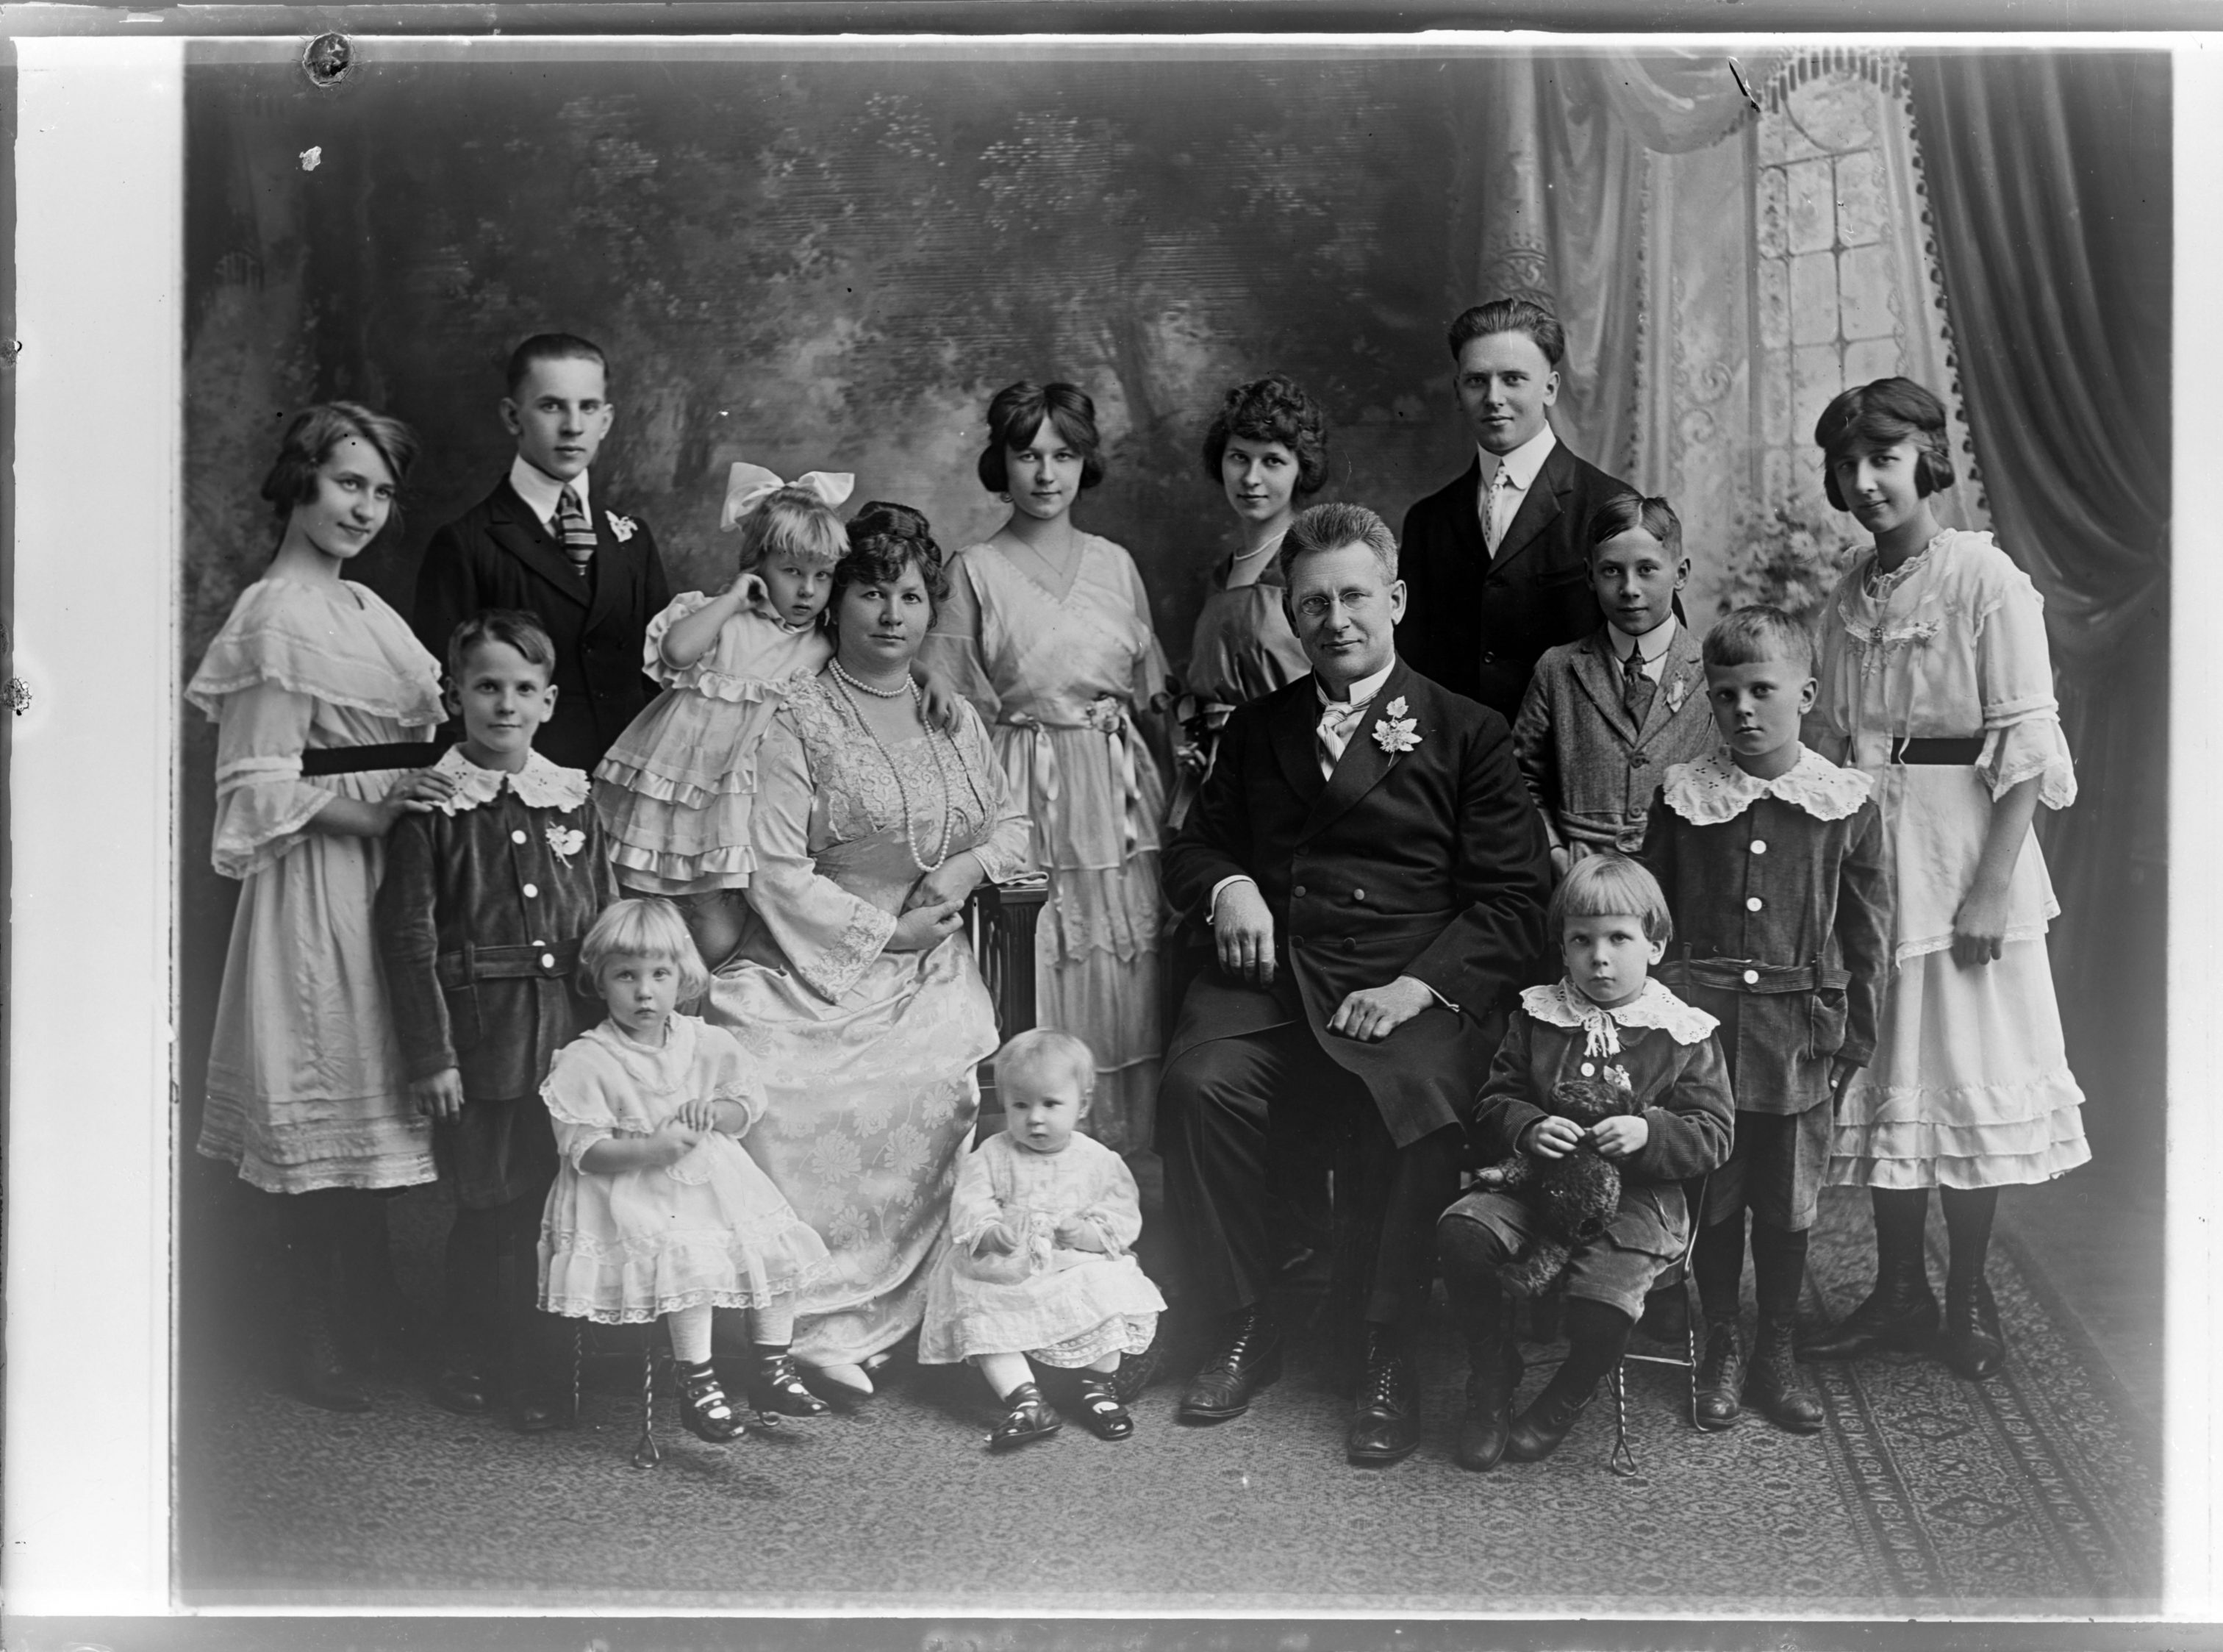 This iconic family portrait, taken during the early 20th century in Milwaukee's Polonia neighborhood, features the Uszler family and their 13 children.